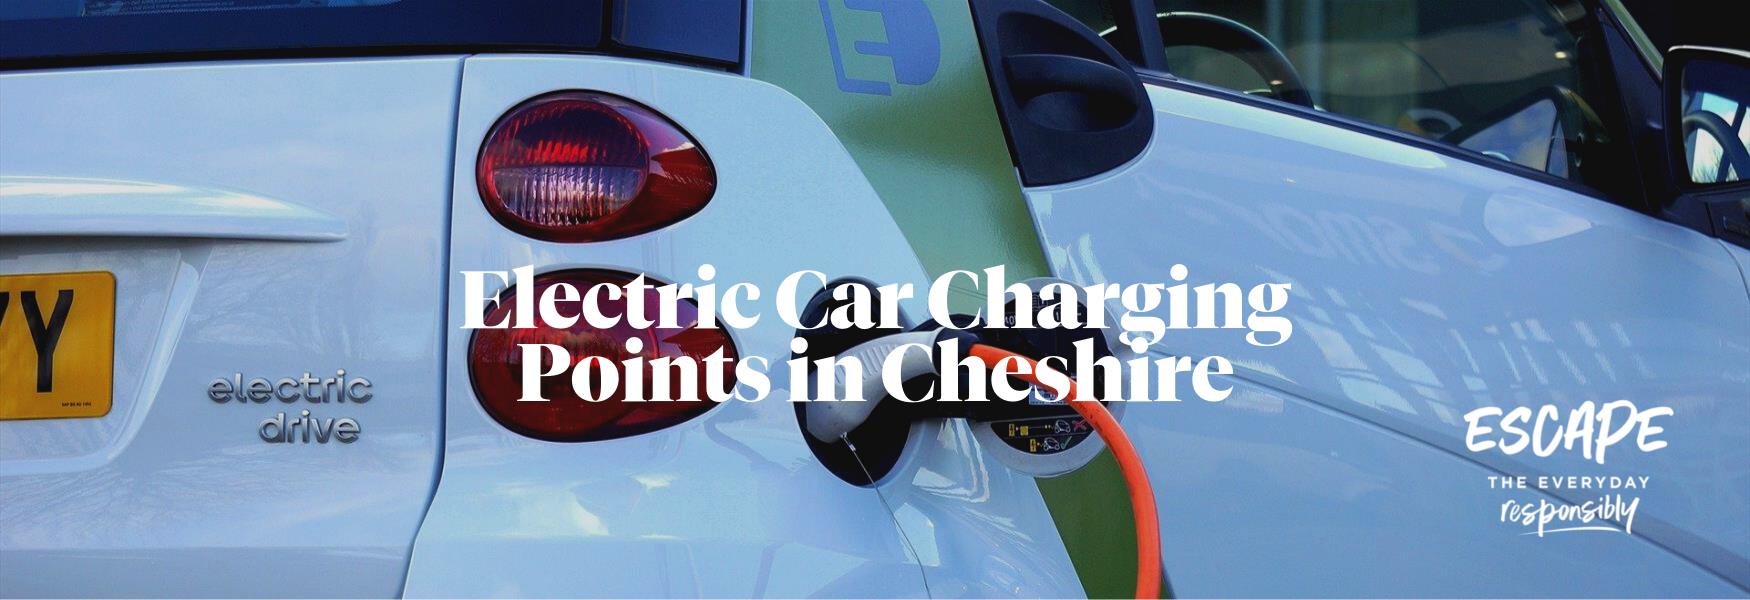 Electric Car Charging Points in Cheshire Visit Cheshire